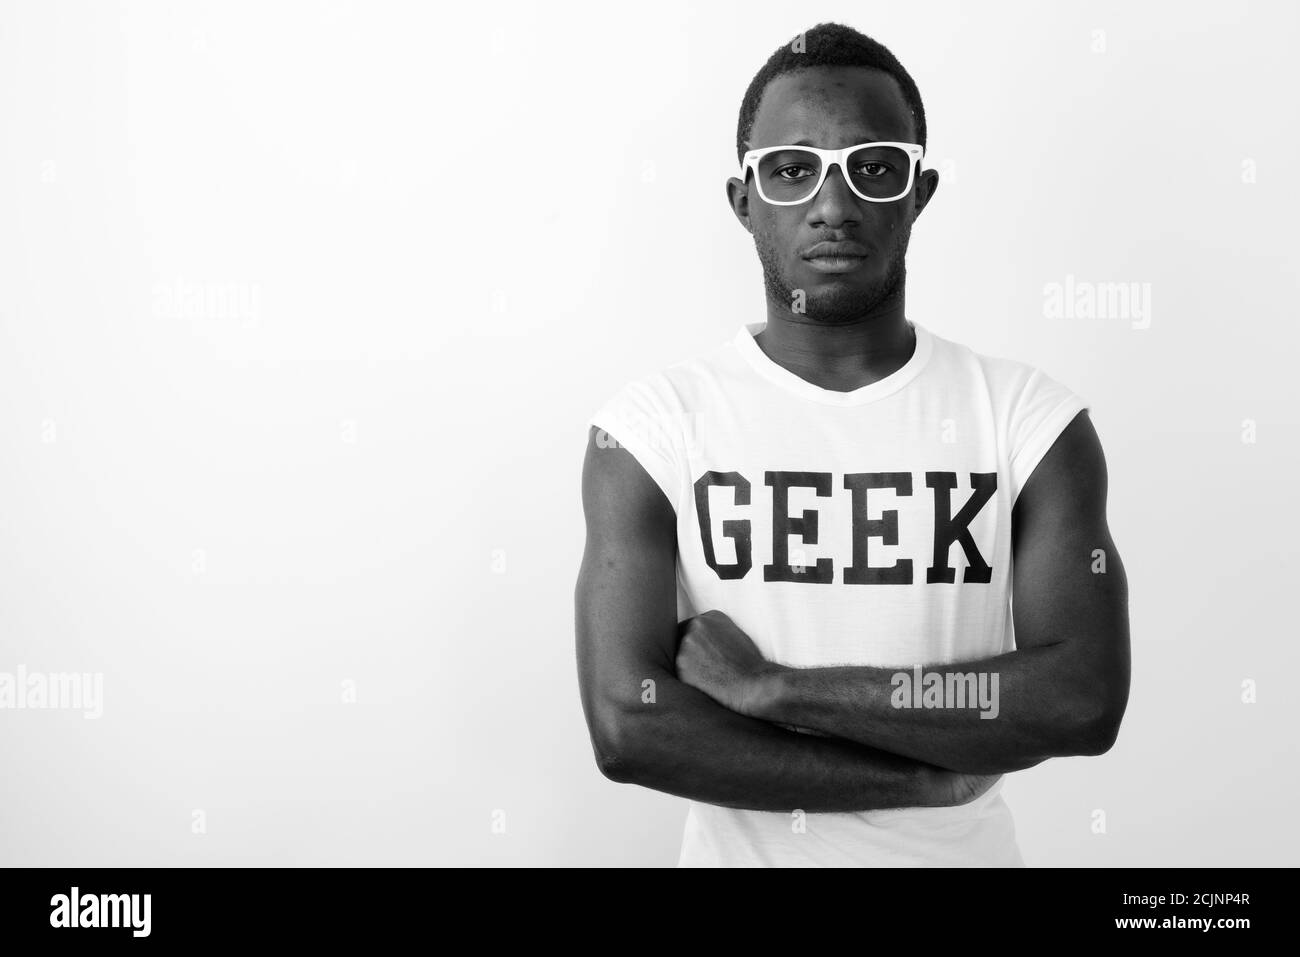 Studio shot of young confident black African nerd man wearing Geek shirt against white background Stock Photo